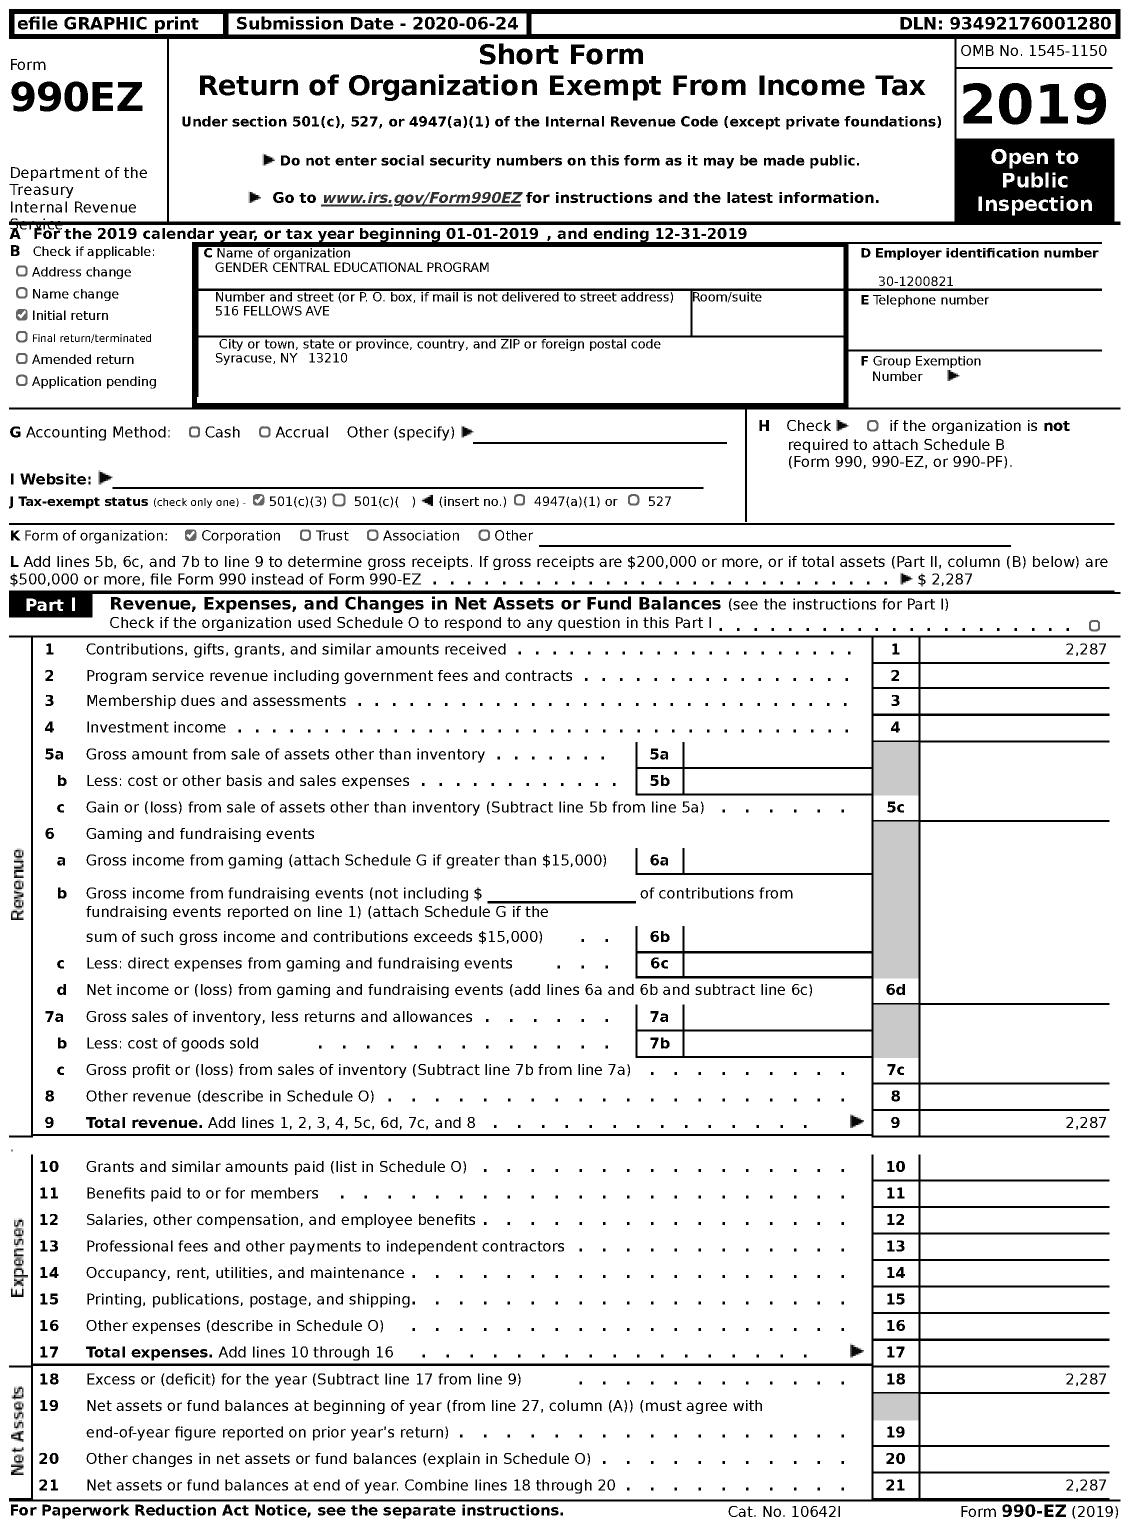 Image of first page of 2019 Form 990EZ for Gender Central Educational Program